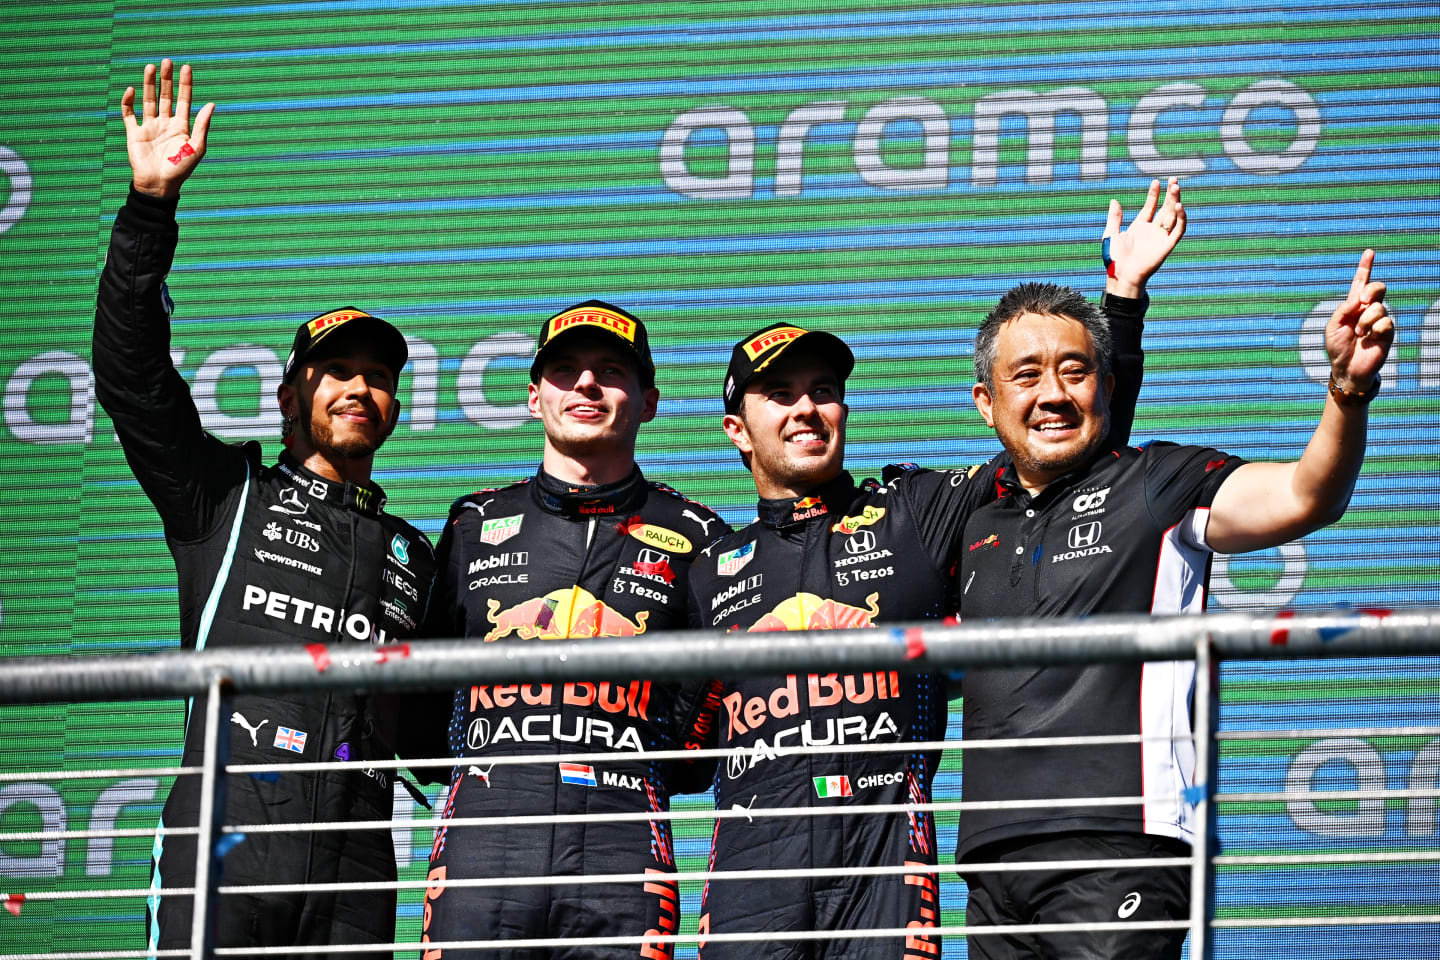 AUSTIN, TEXAS - OCTOBER 24: Race winner Max Verstappen of Netherlands and Red Bull Racing, second placed Lewis Hamilton of Great Britain and Mercedes GP, third placed Sergio Perez of Mexico and Red Bull Racing and Masashi Yamamoto of Honda celebrate on the podium during the F1 Grand Prix of USA at Circuit of The Americas on October 24, 2021 in Austin, Texas. (Photo by Clive Mason - Formula 1/Formula 1 via Getty Images)